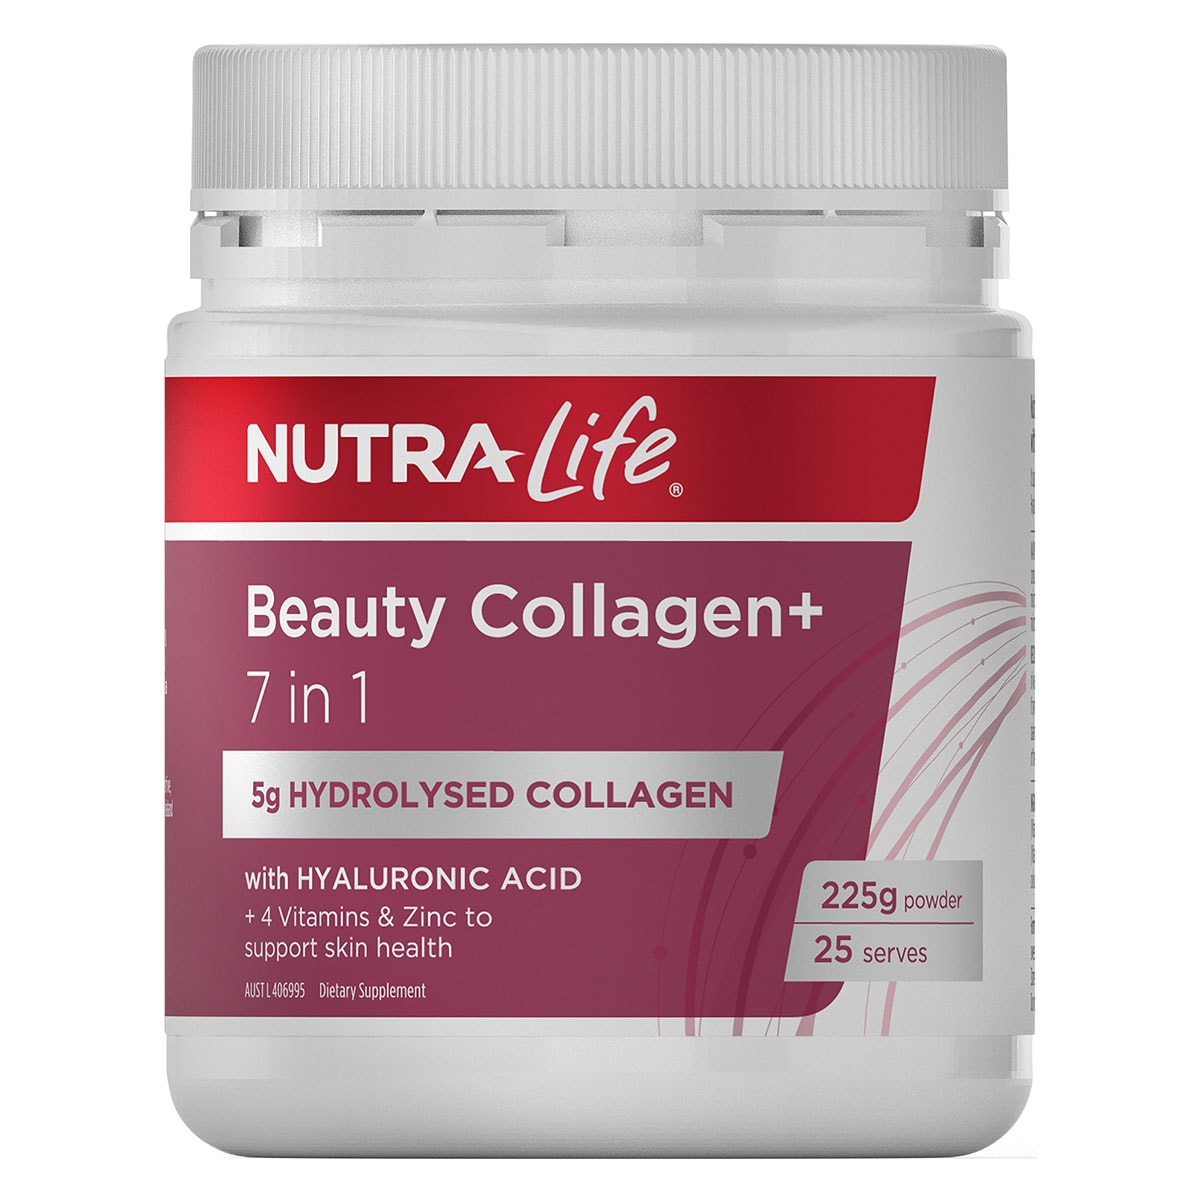 Nutra-life Collagen Beauty + 225g